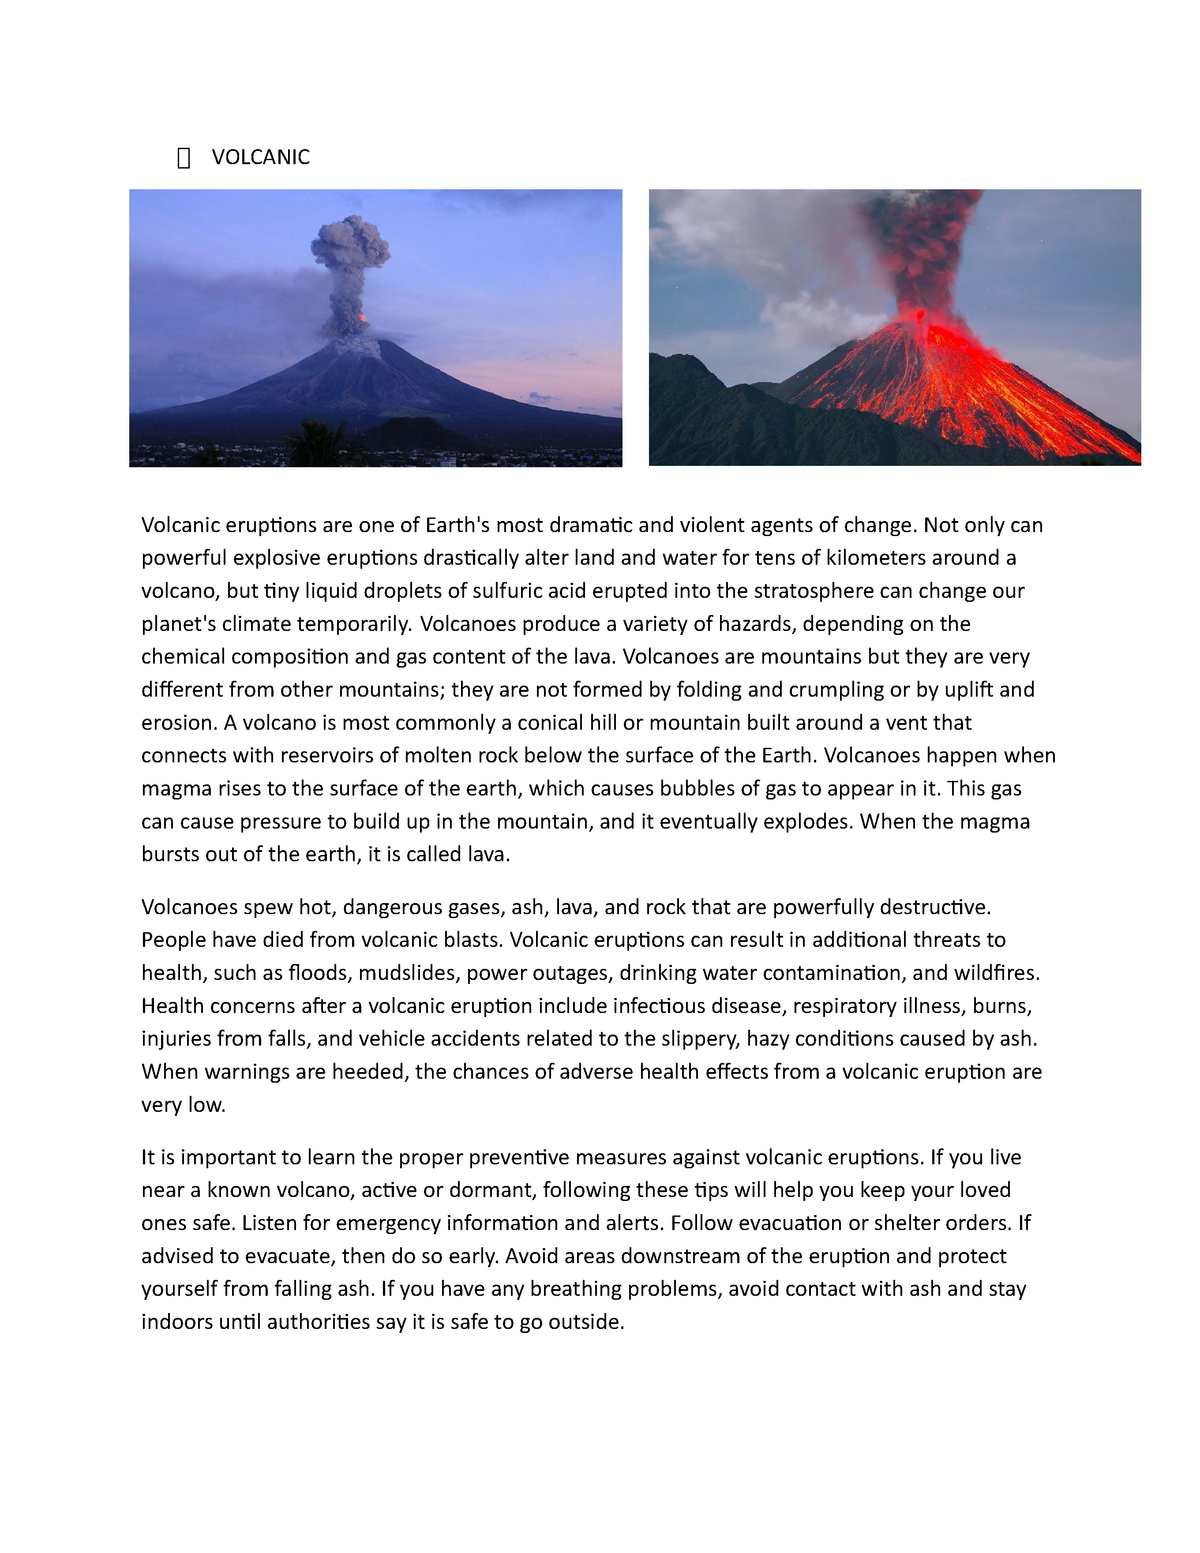 an essay about volcanoes